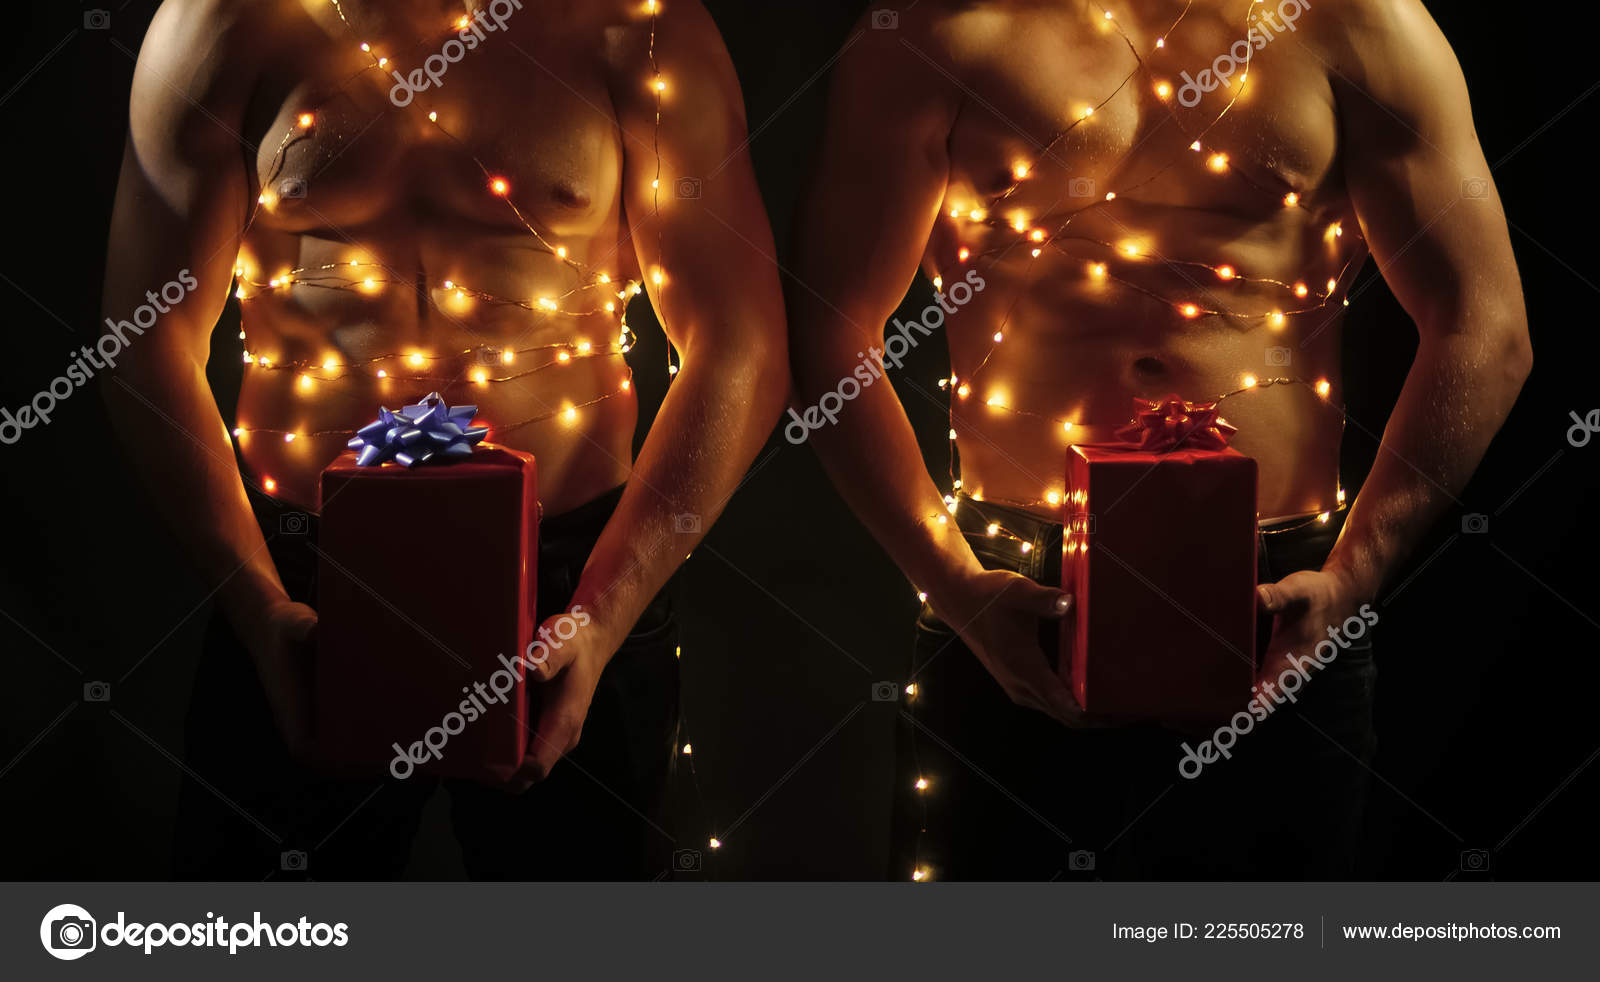 Christmas party and sex games